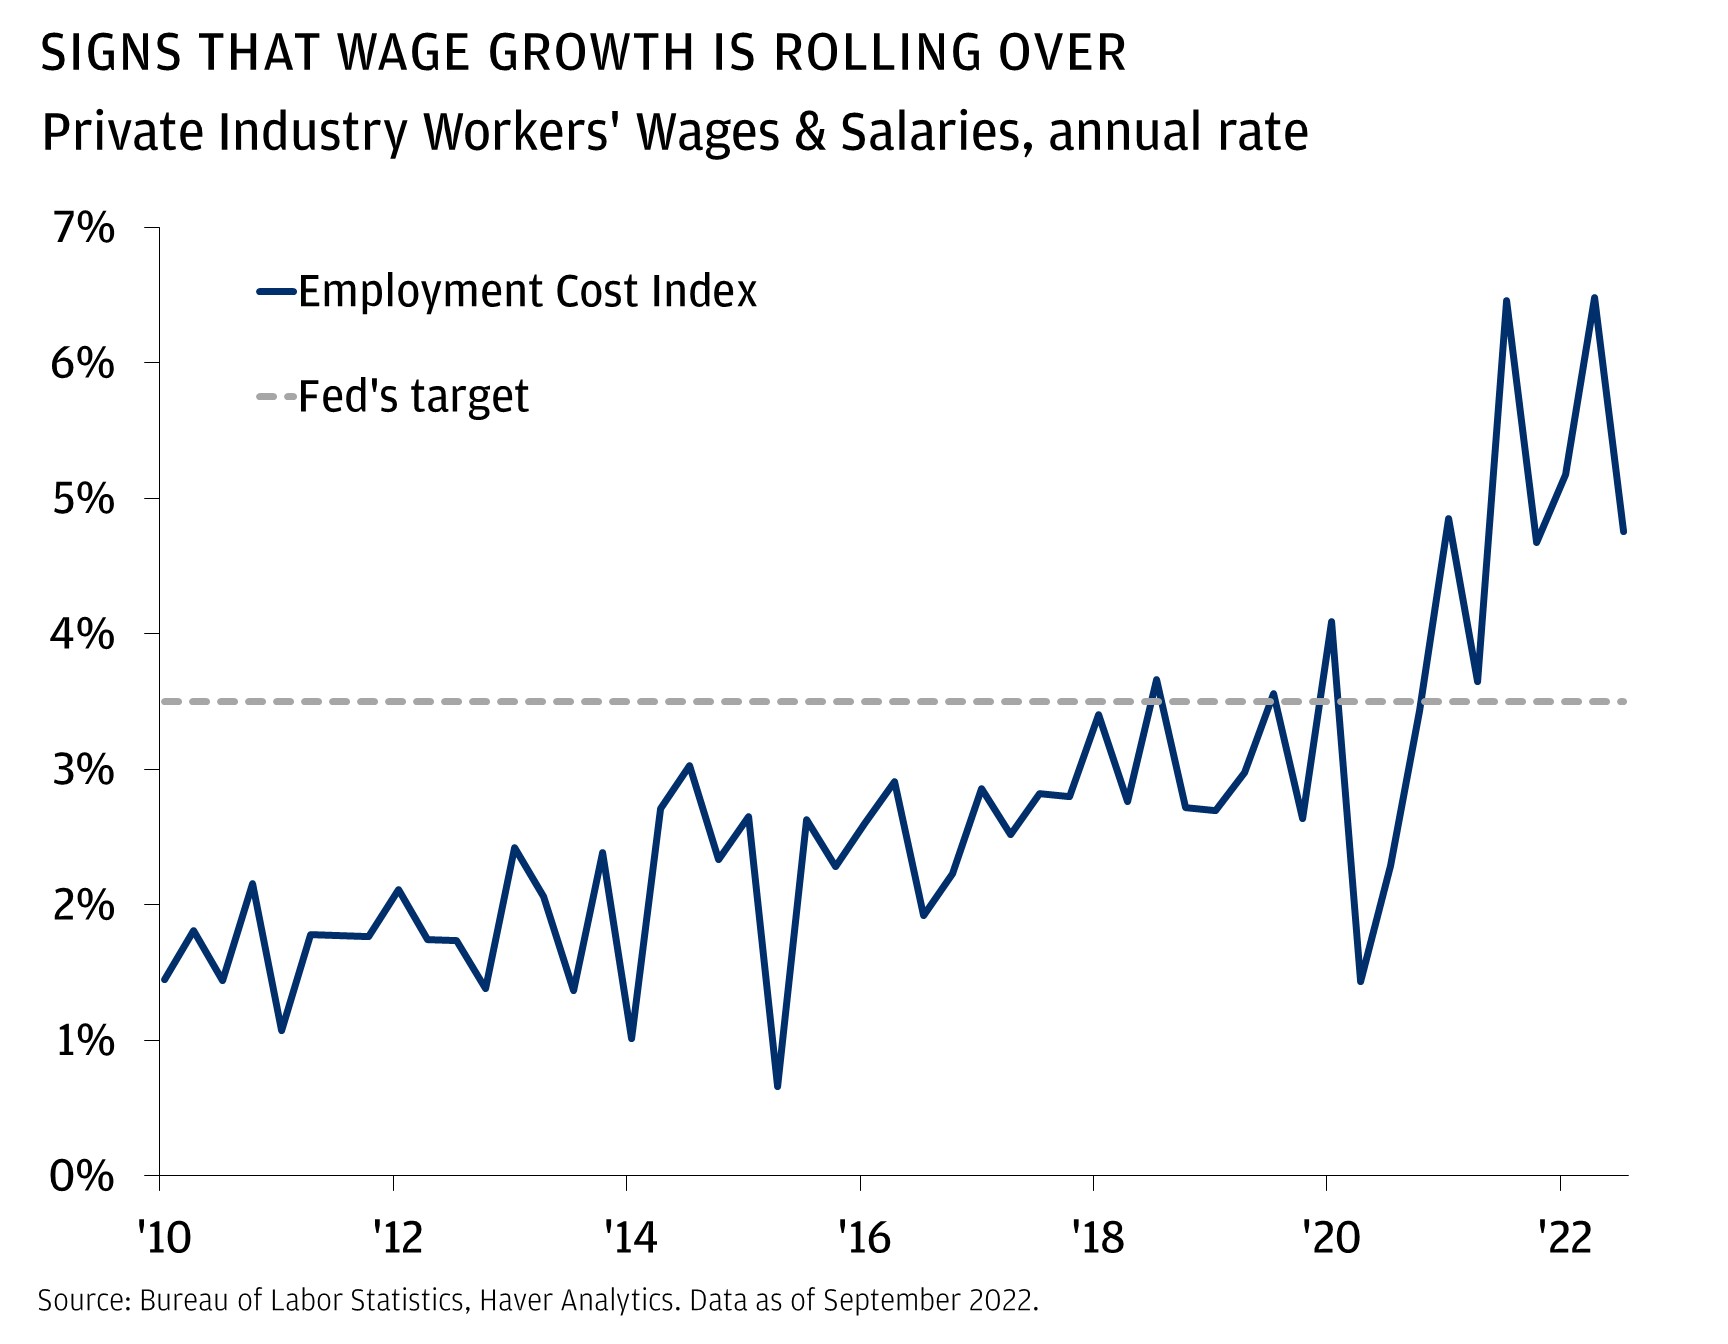 This chart shows the U.S. Employment Cost Index: Private Industry Workers’' Wages & Salaries, annual rate relative to the Fed’s target of 3.5% from 2010 to 2022.